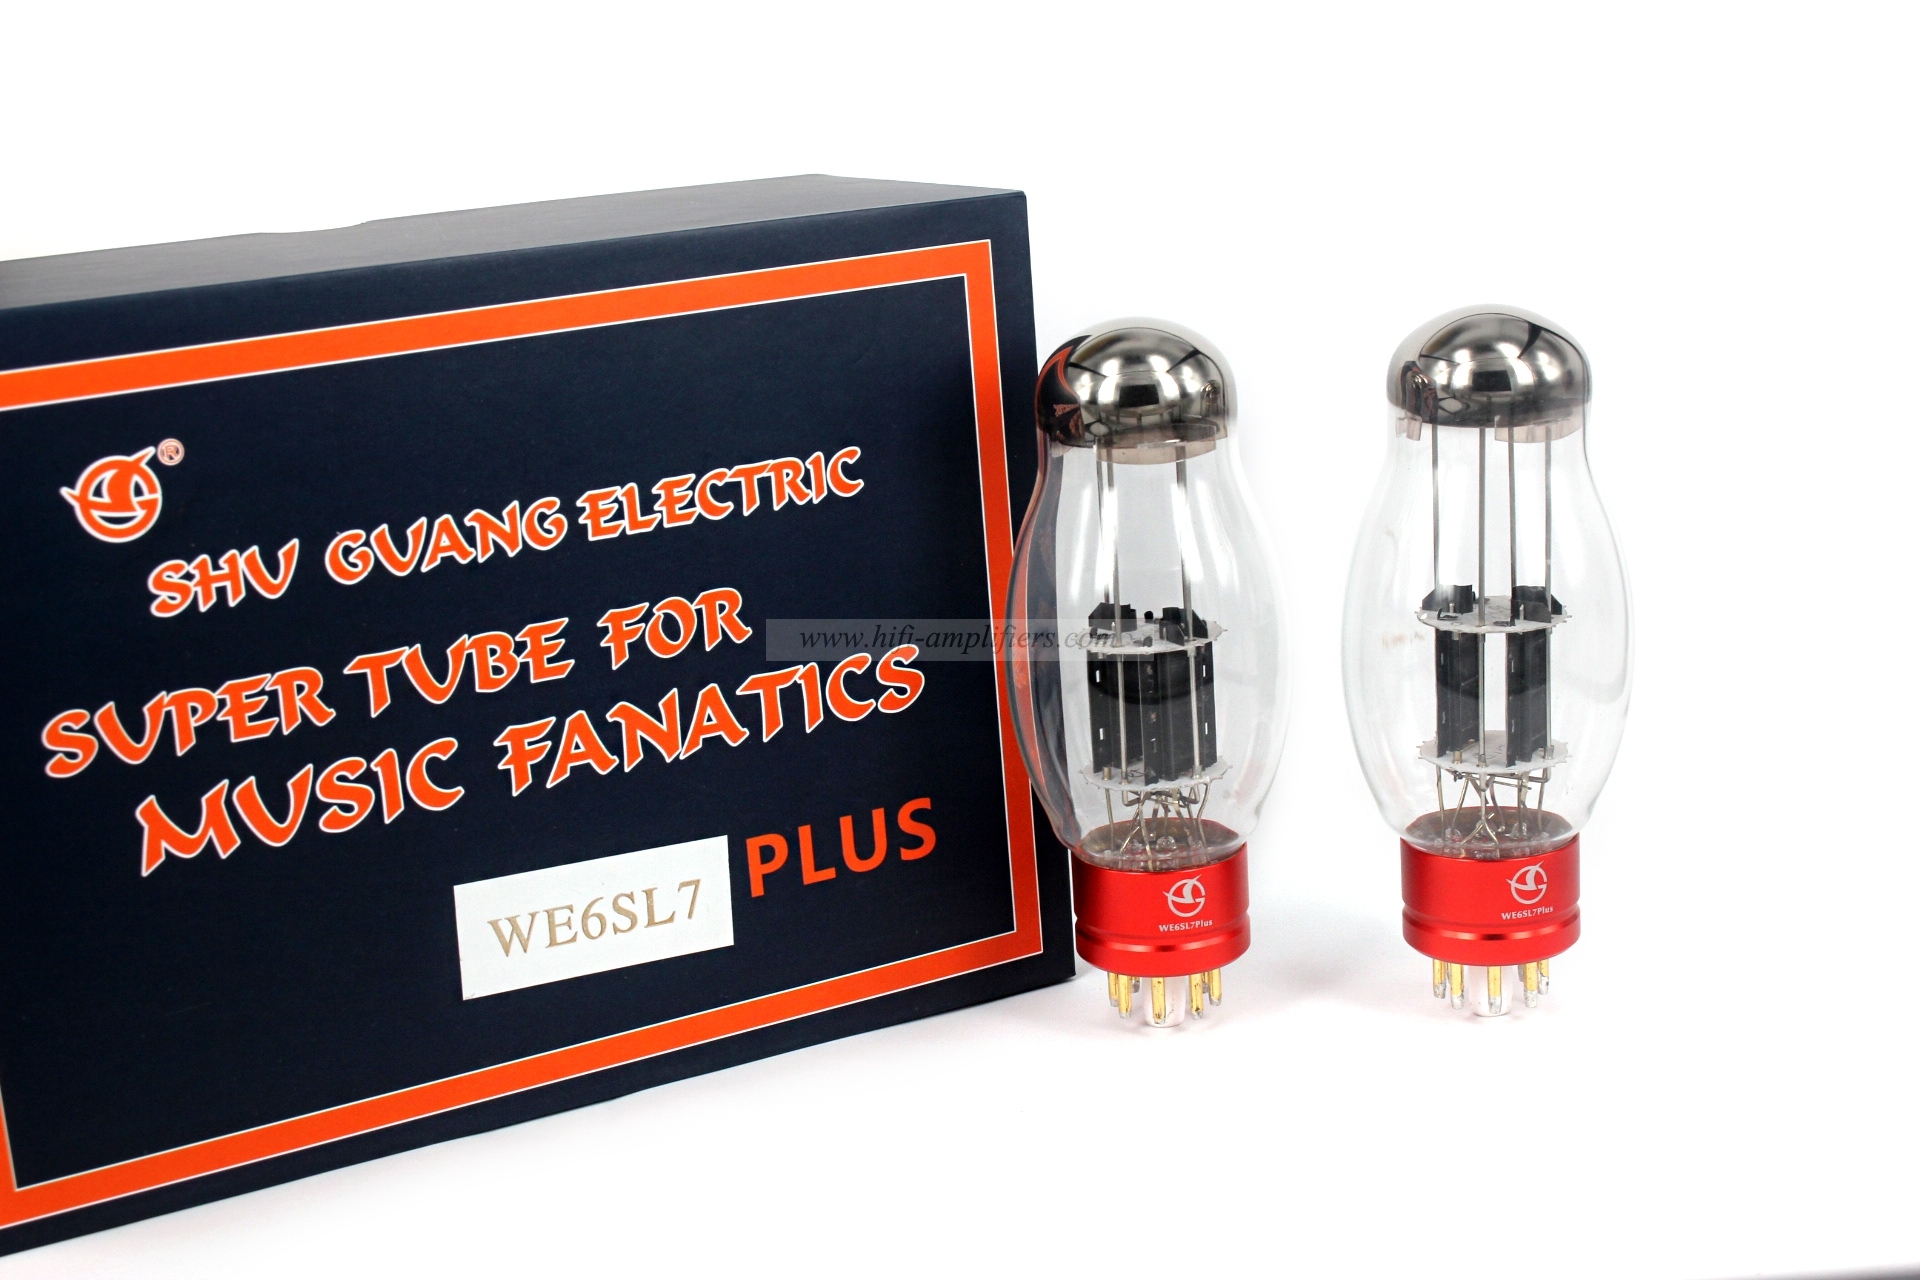 Shuguang WE6SL7 PLUS Hi-end Vacuum Tube Electronic value Replace WE6SL7 Matched Pair